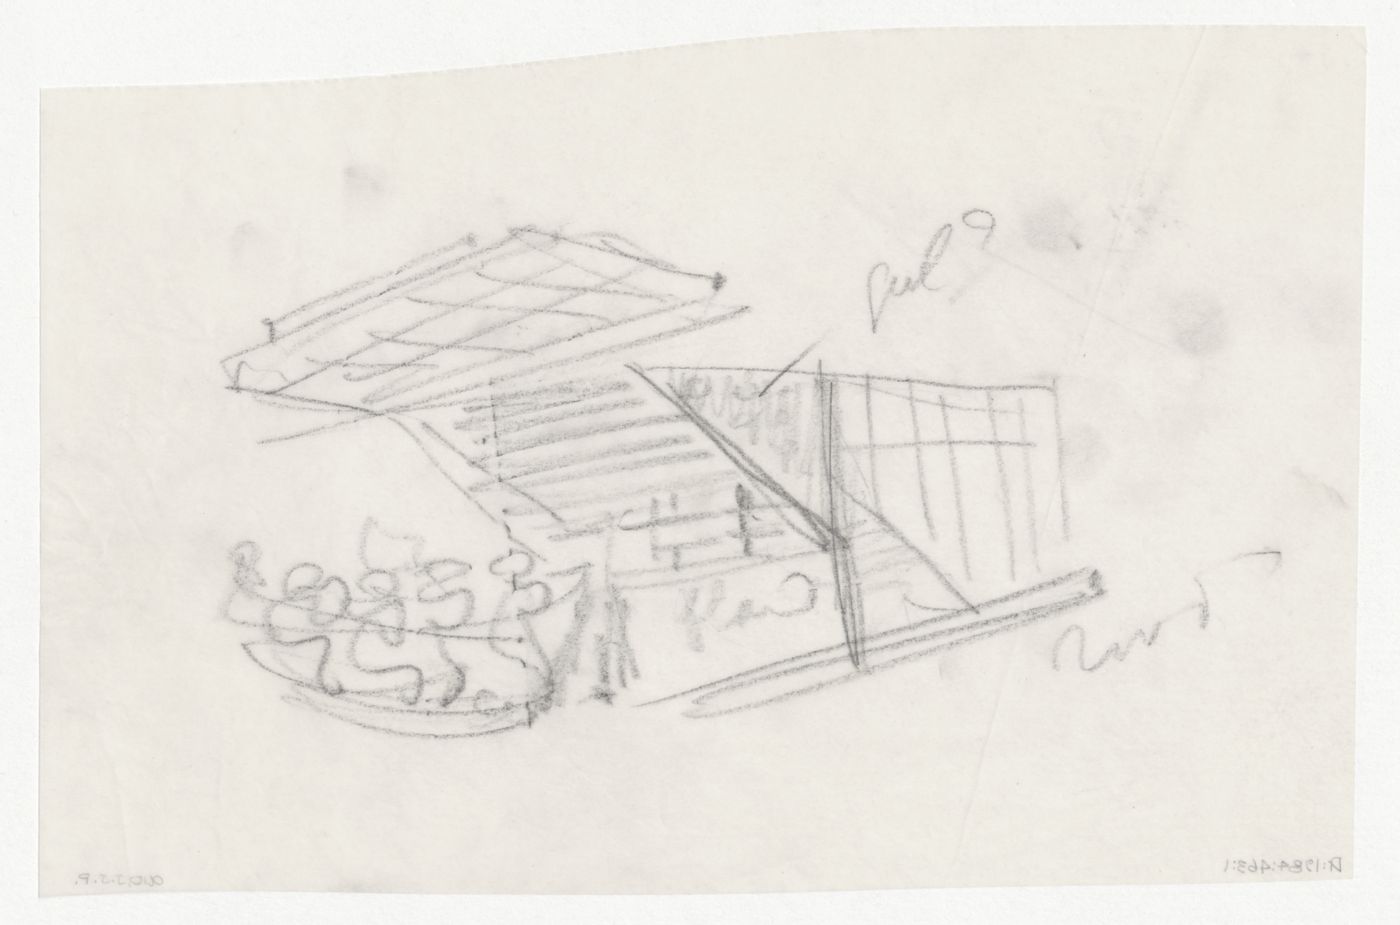 Sketch perspective for a food kiosk for the Congress Hall Complex, The Hague, Netherlands